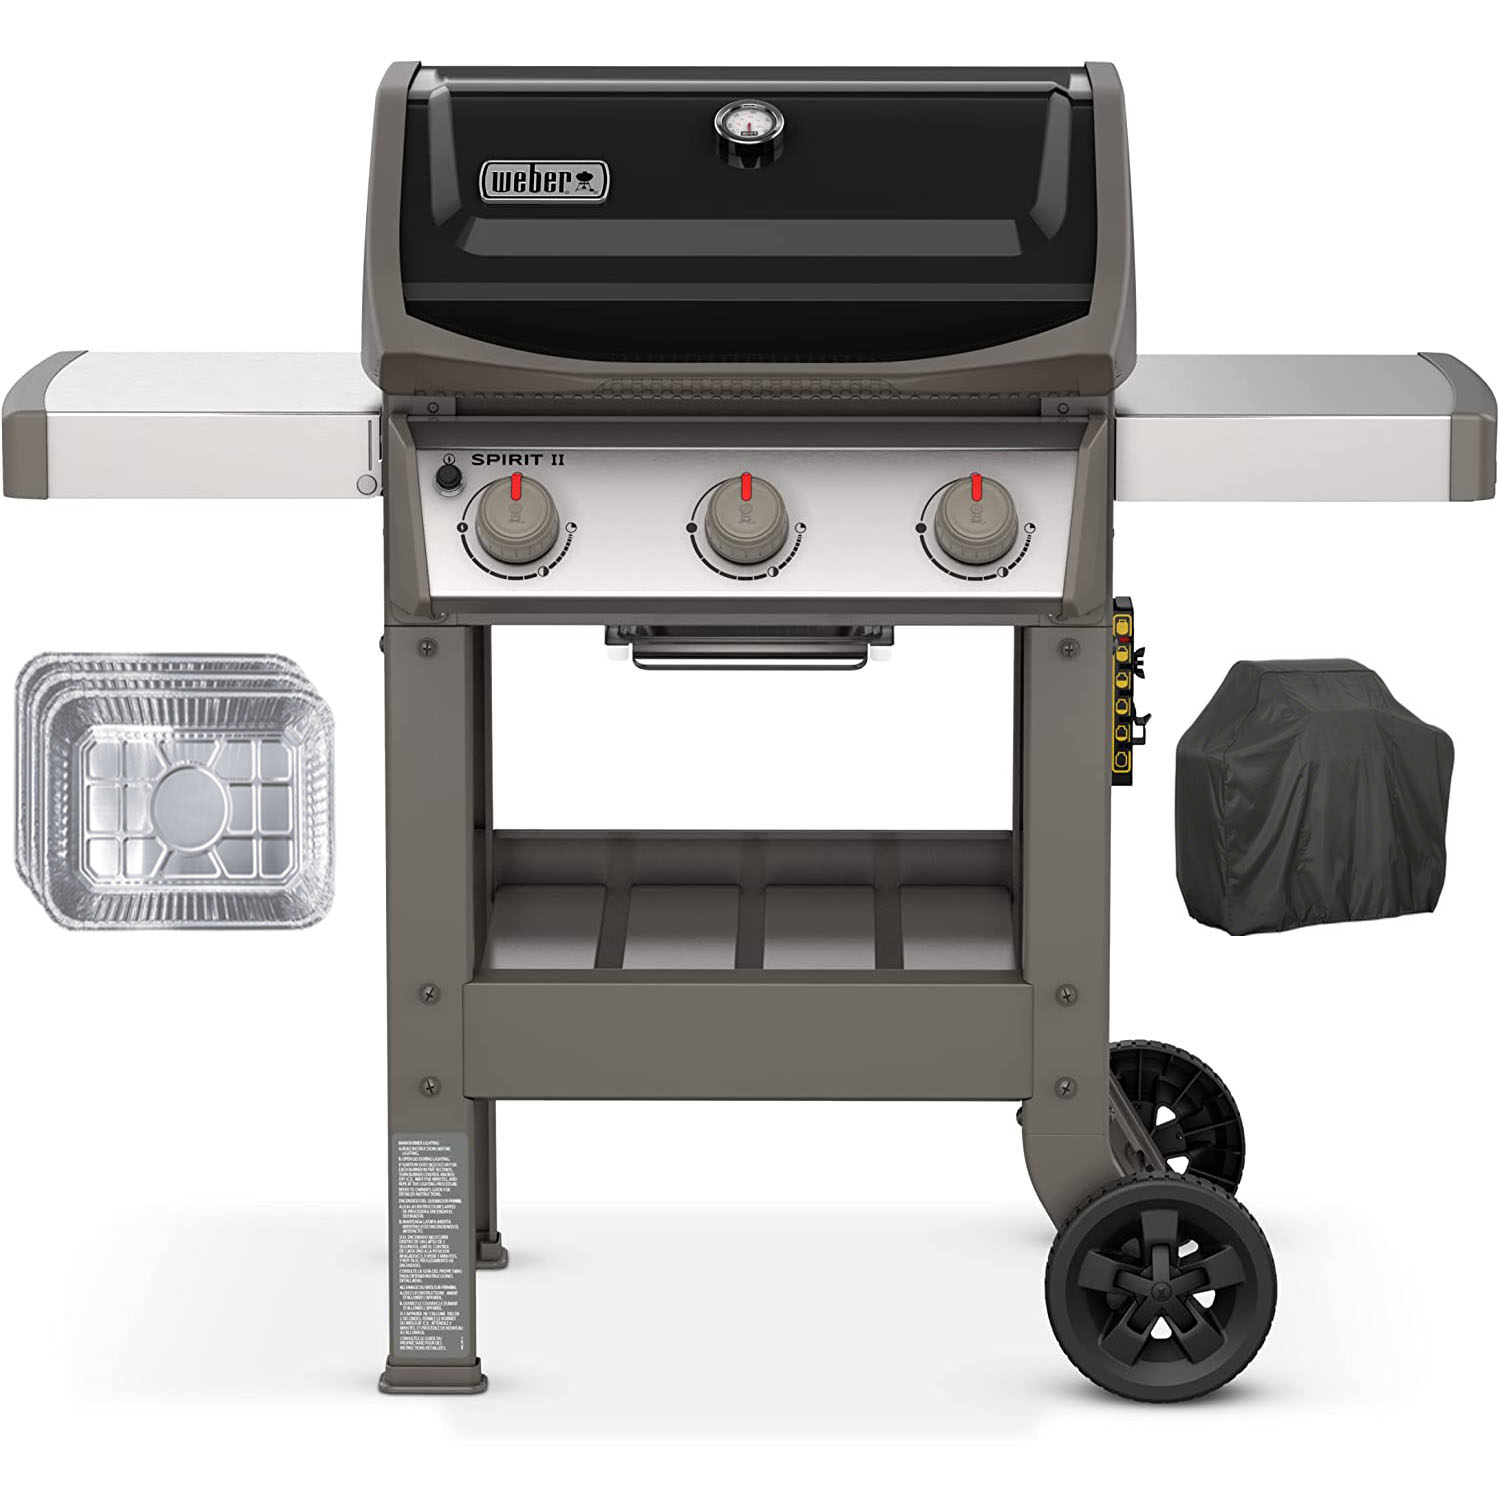 Weber 45010001 Spirit II E-310 Gas Grill Liquid Propane Bundle with Generic Grill Cover Barbecue Waterproof Outdoor Protection and Aluminum Drip Pans Set of 3 - image 1 of 10